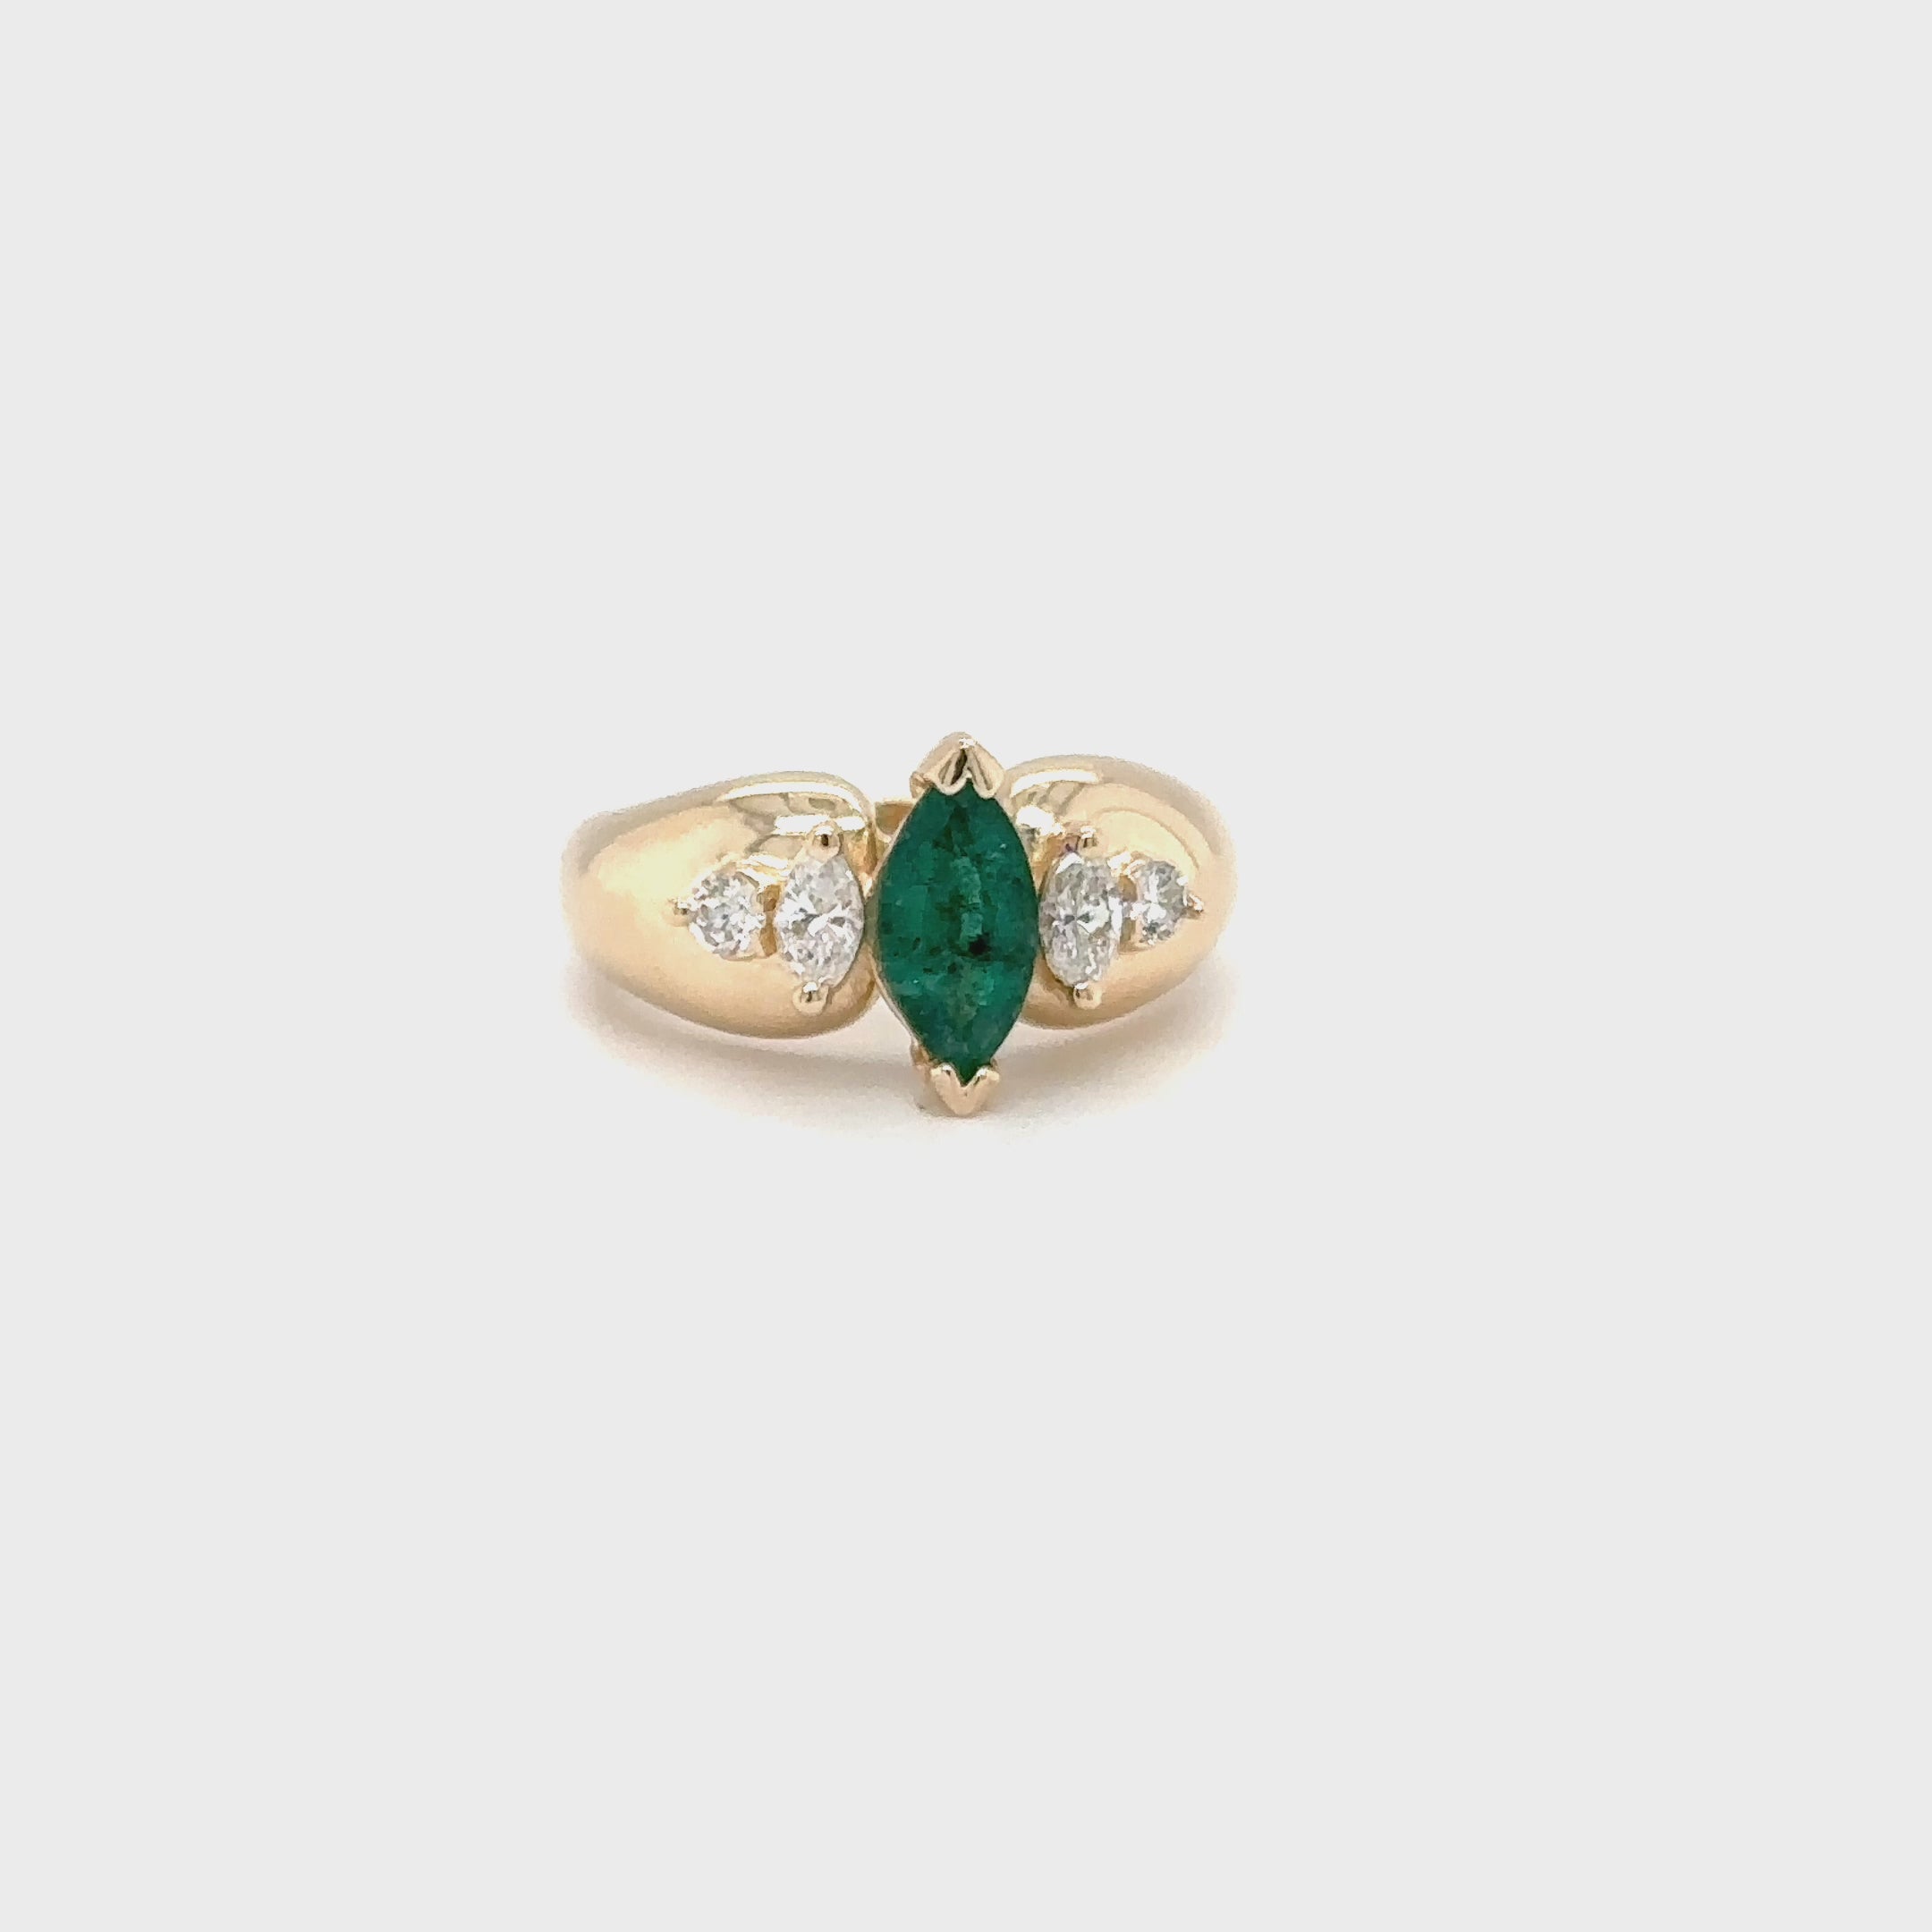 Natural Emerald & Diamond Ring 14K Solid Gold .95tcw May Birthstone Ring Green Marquise Gemstone Ring Vintage Jewellery Estate Jewelry